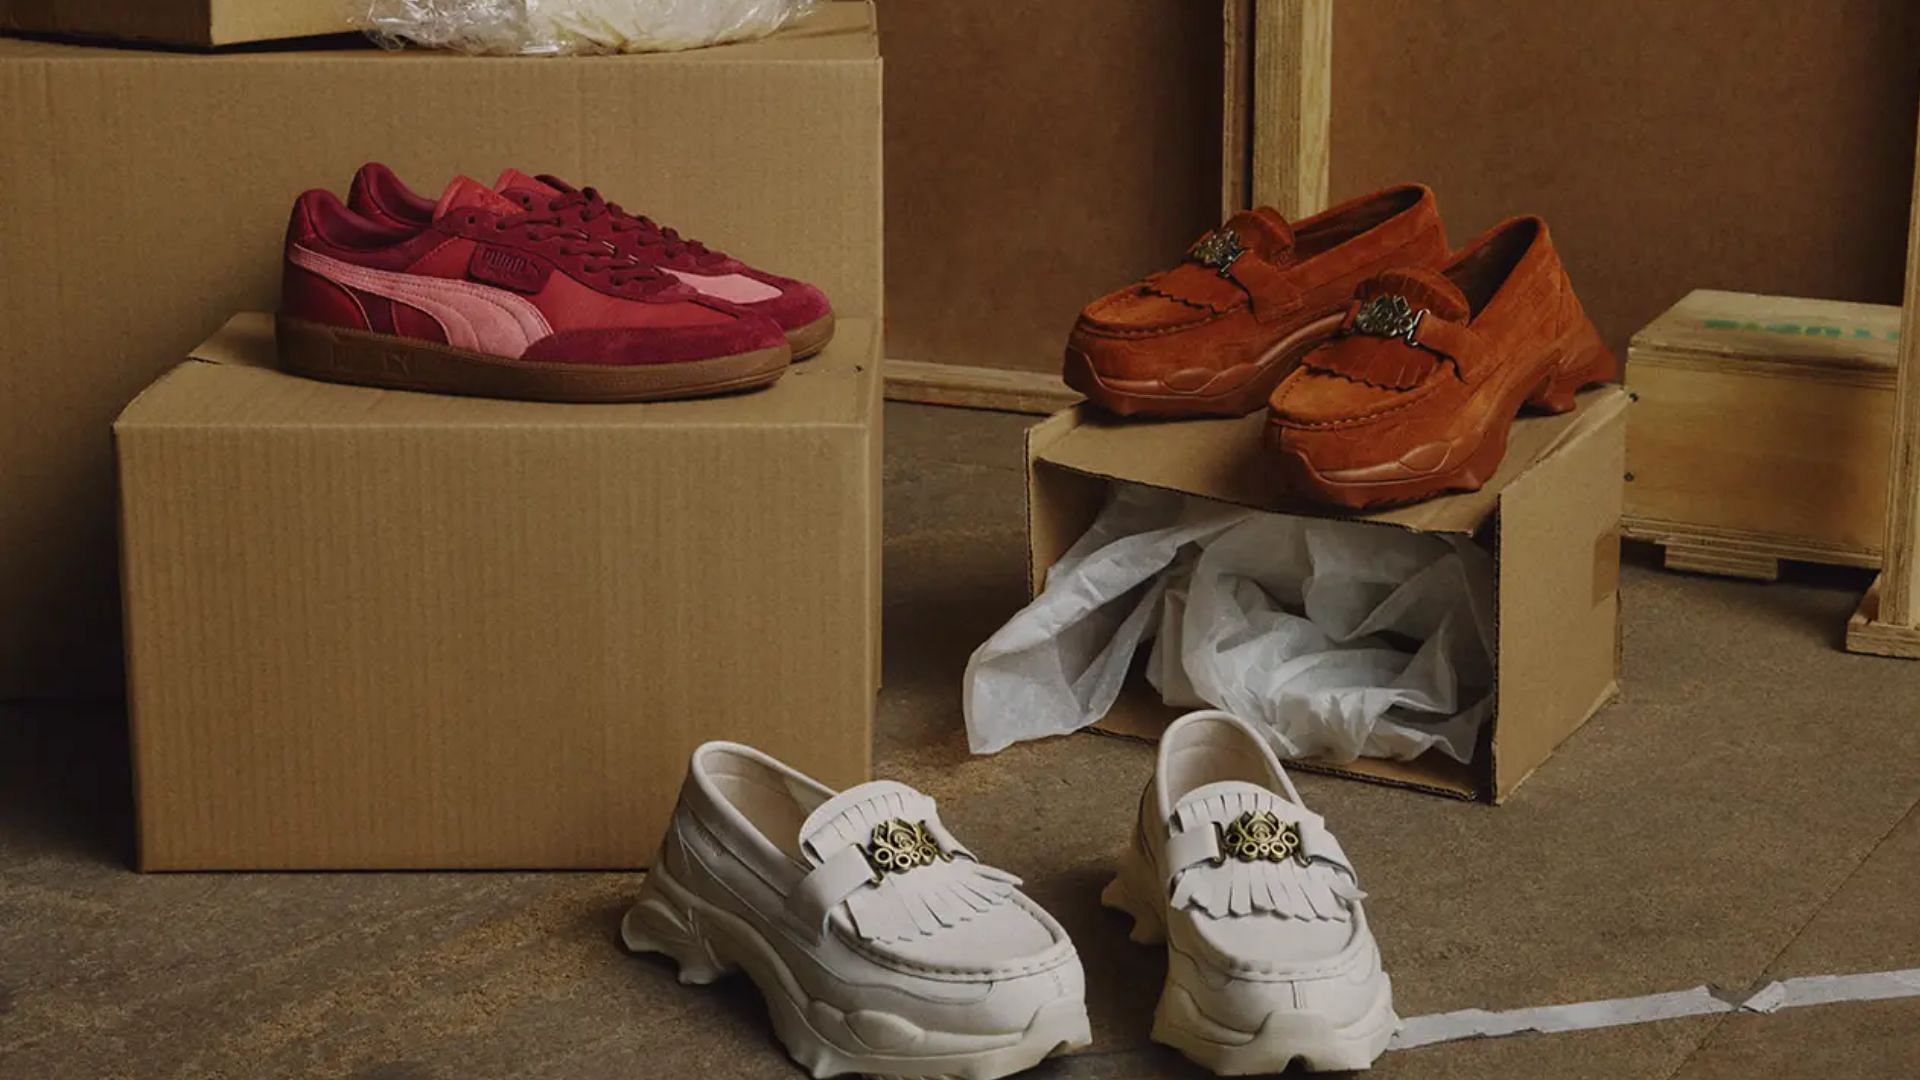 Puma x Palomo Spain introduces a brand new collection celebrating 